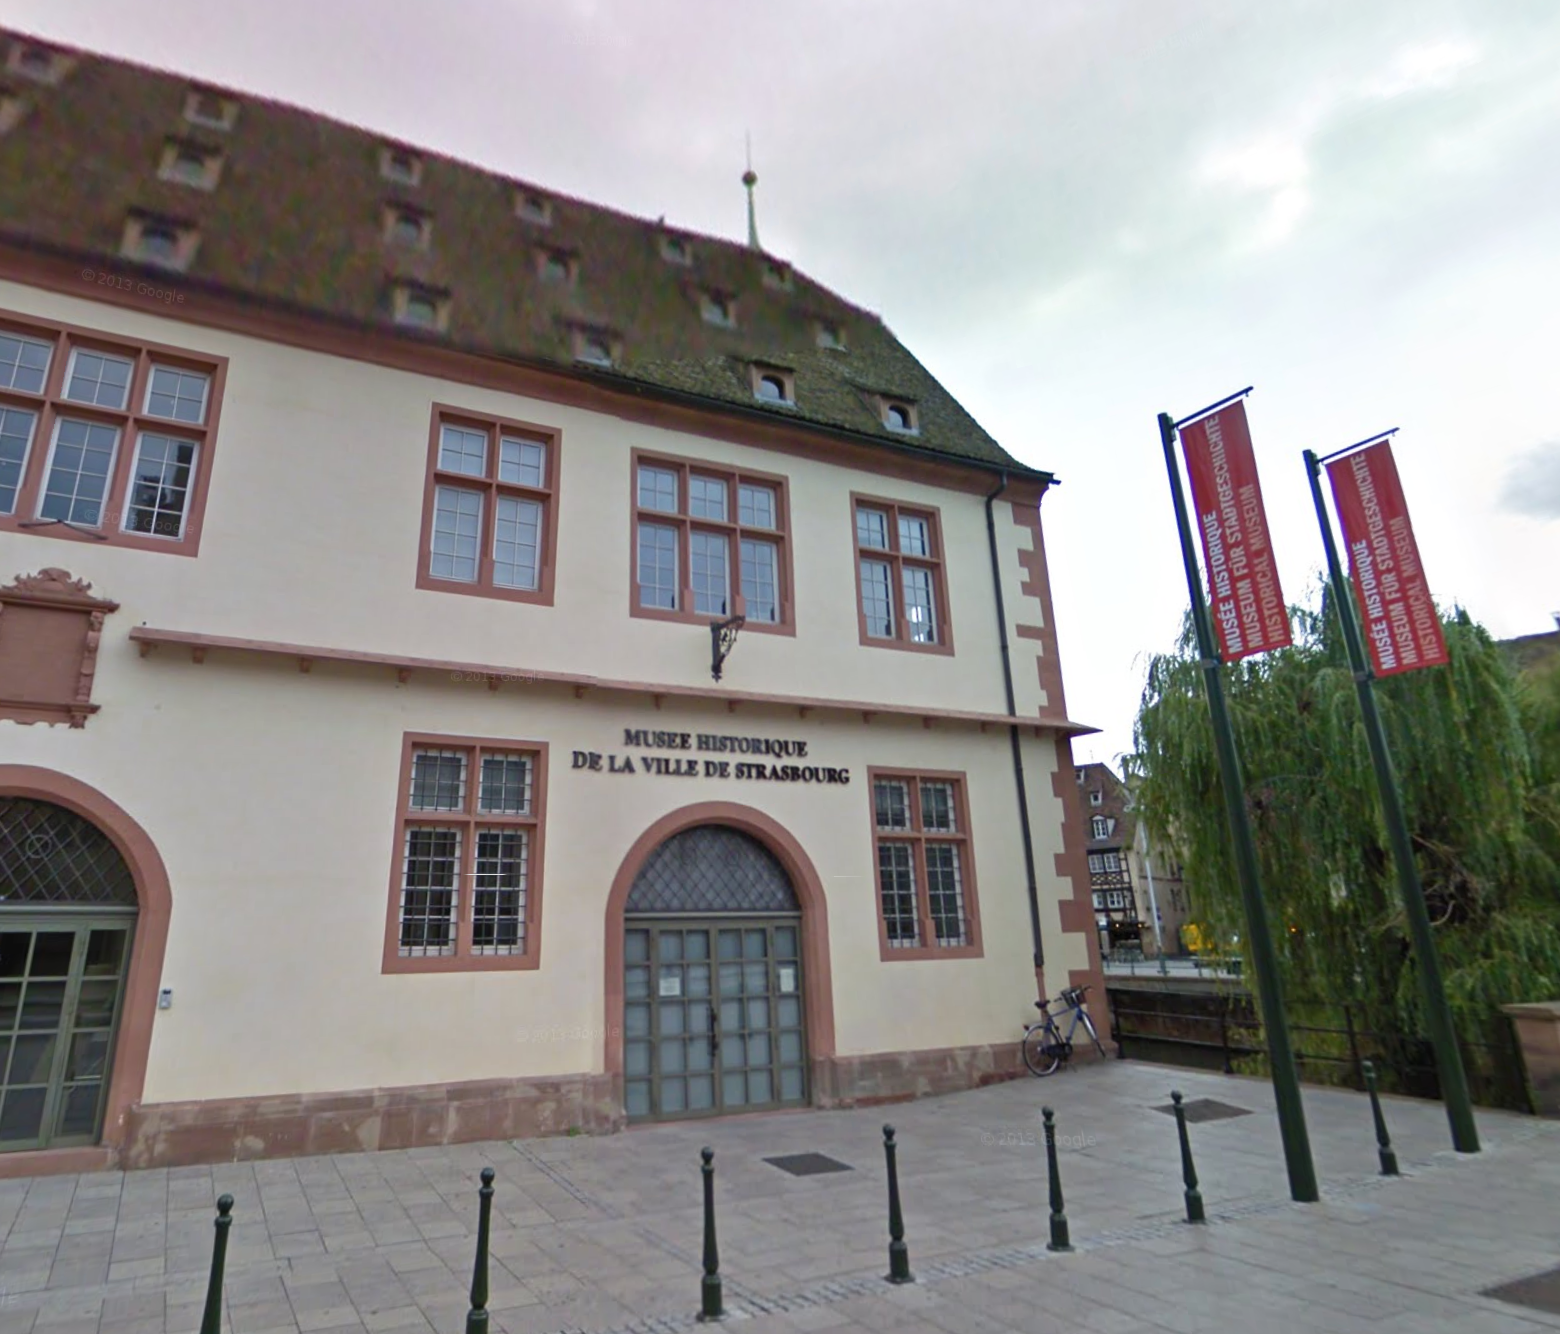 Historical Museum of the City of Strasbourg by Google Earth